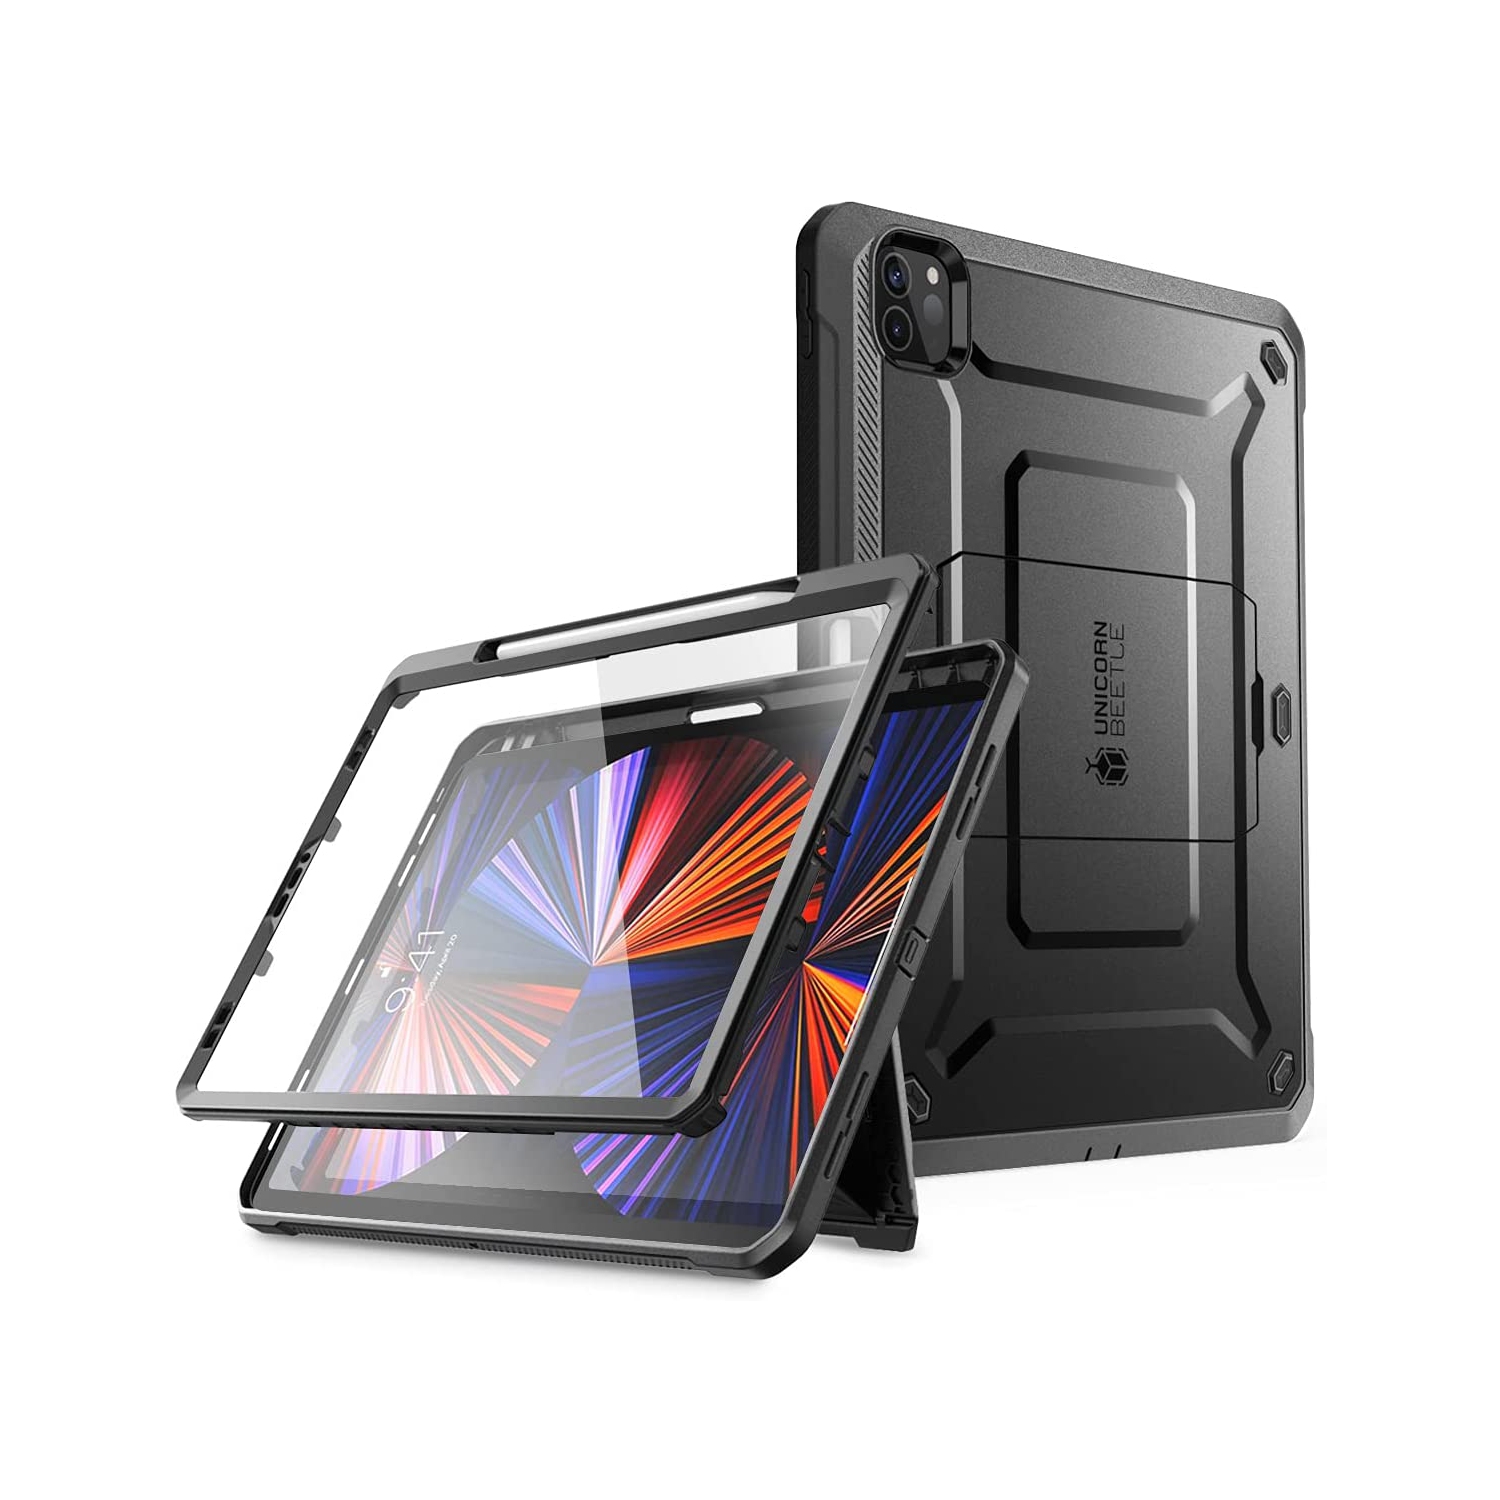 Case for iPad Pro 11” 2021/2020, Built-in Screen Protector, Dual Layer Shockproof Full Body Protective Cover with Kickstand and Pencil Holder for iPad Pro 11 3rd Gen/2nd Gen (Black)